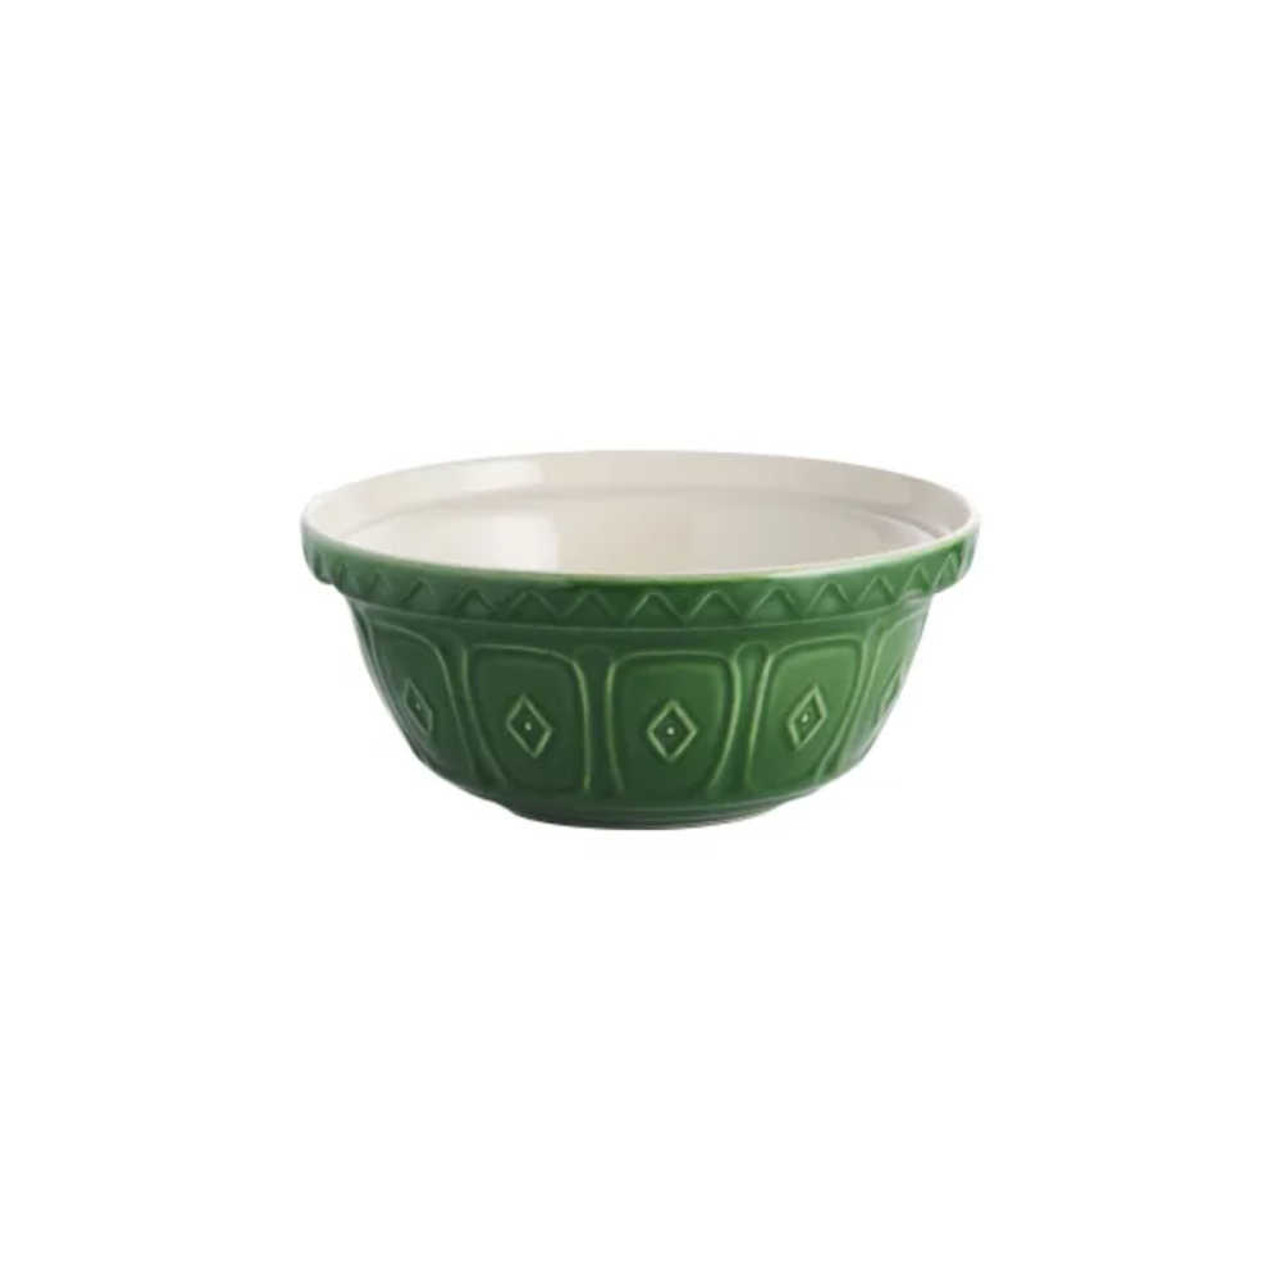 https://cdn11.bigcommerce.com/s-hccytny0od/images/stencil/1280x1280/products/5012/21345/Mason_Cash_Color_Mix_Green_9.5-Inch_Mixing_Bowl__44068.1664673123.jpg?c=2?imbypass=on